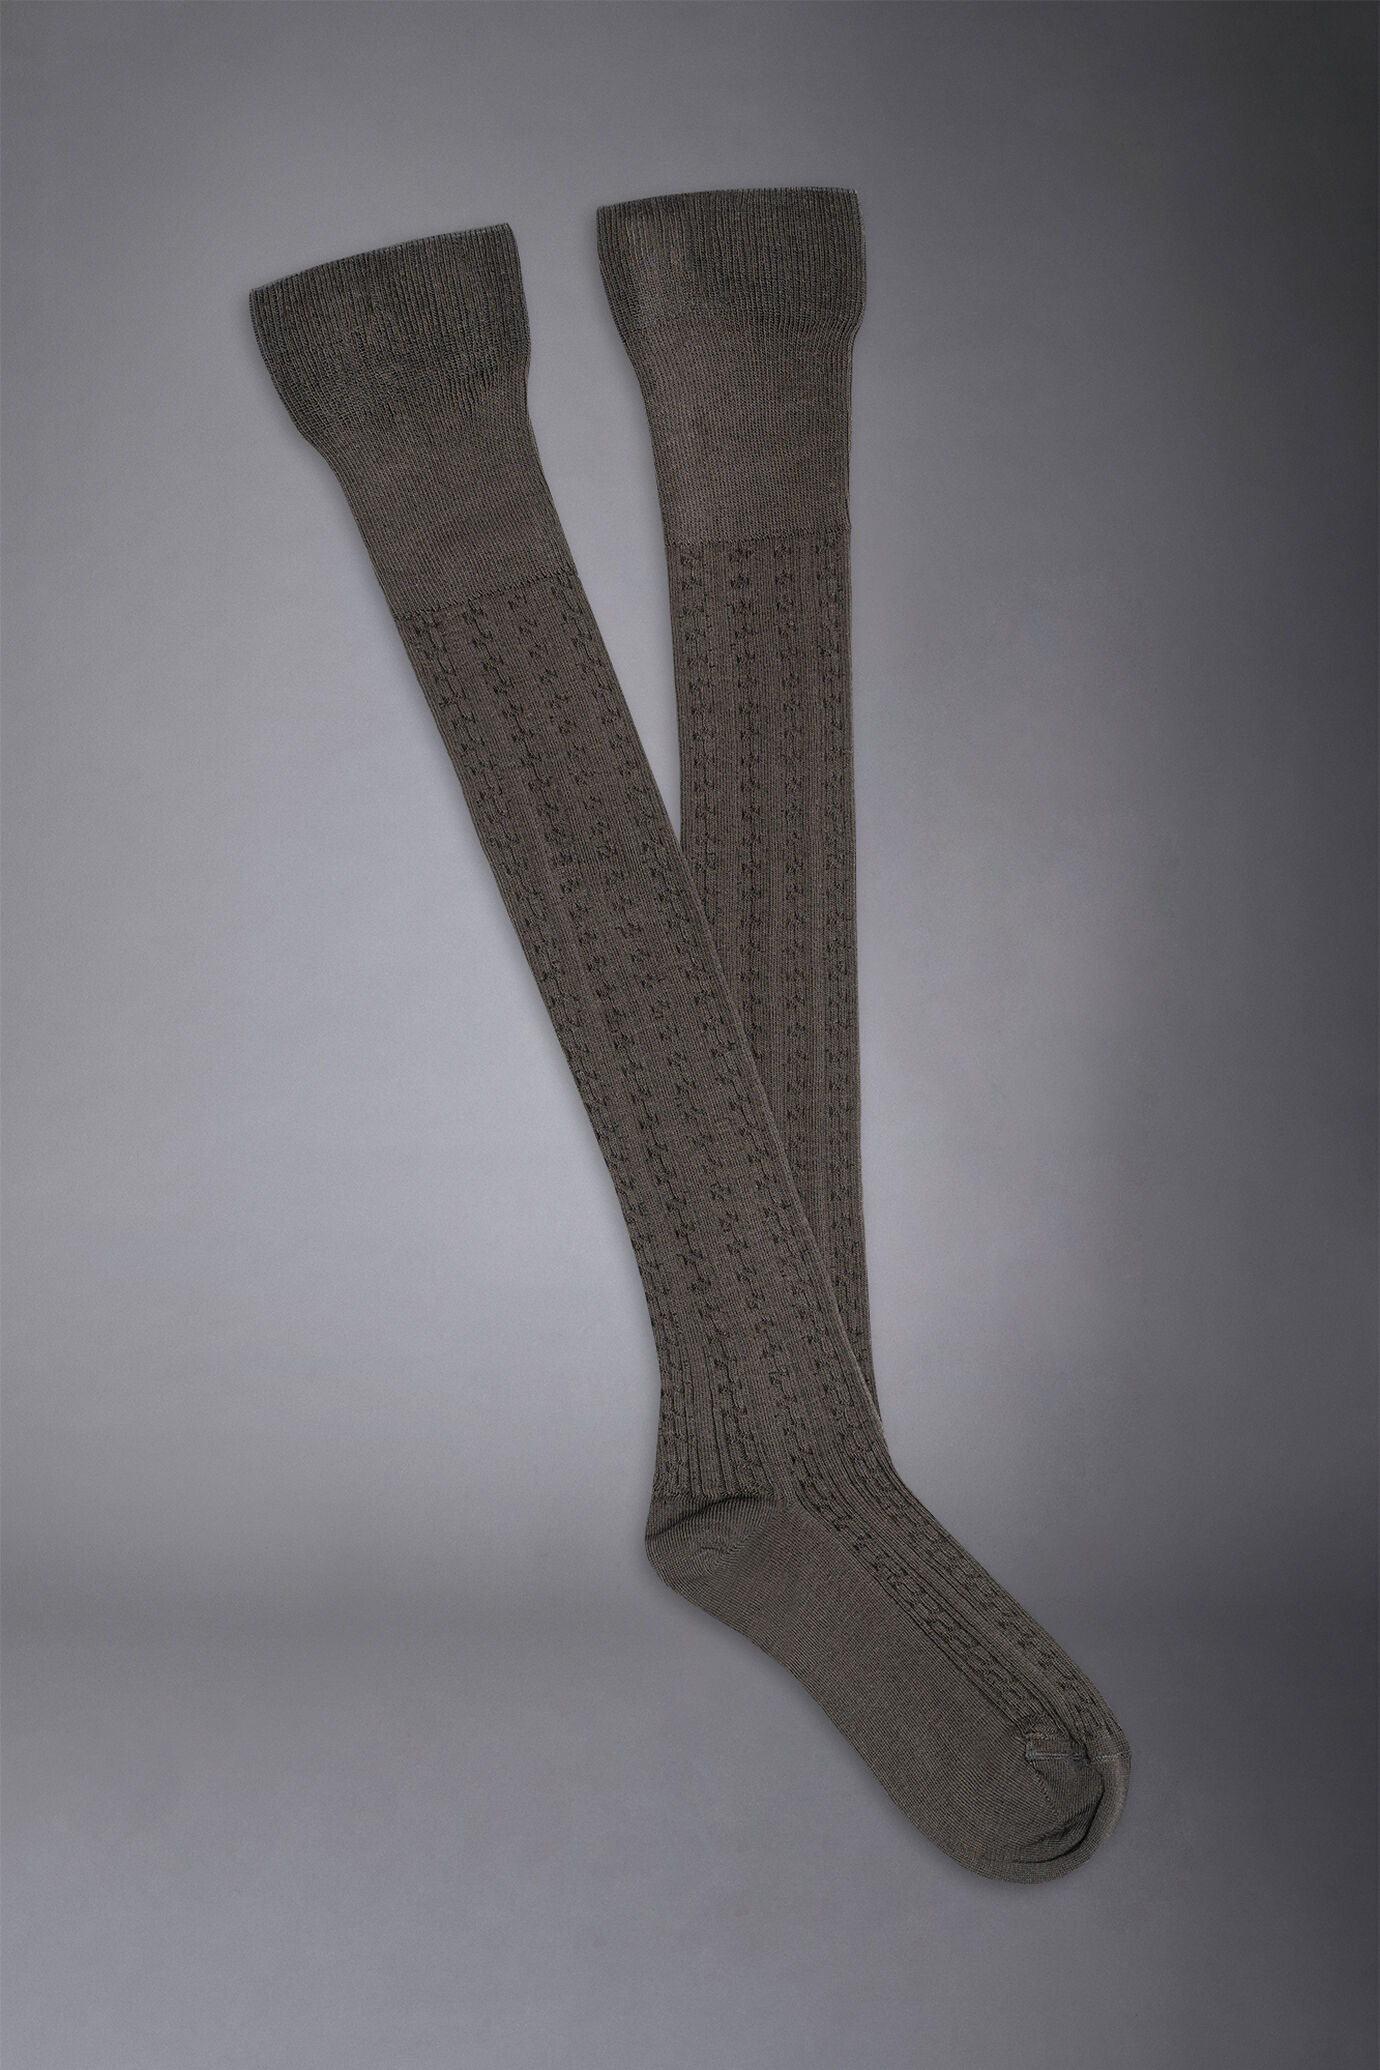 Cotton blended parisian socks fancy knitted made in italy